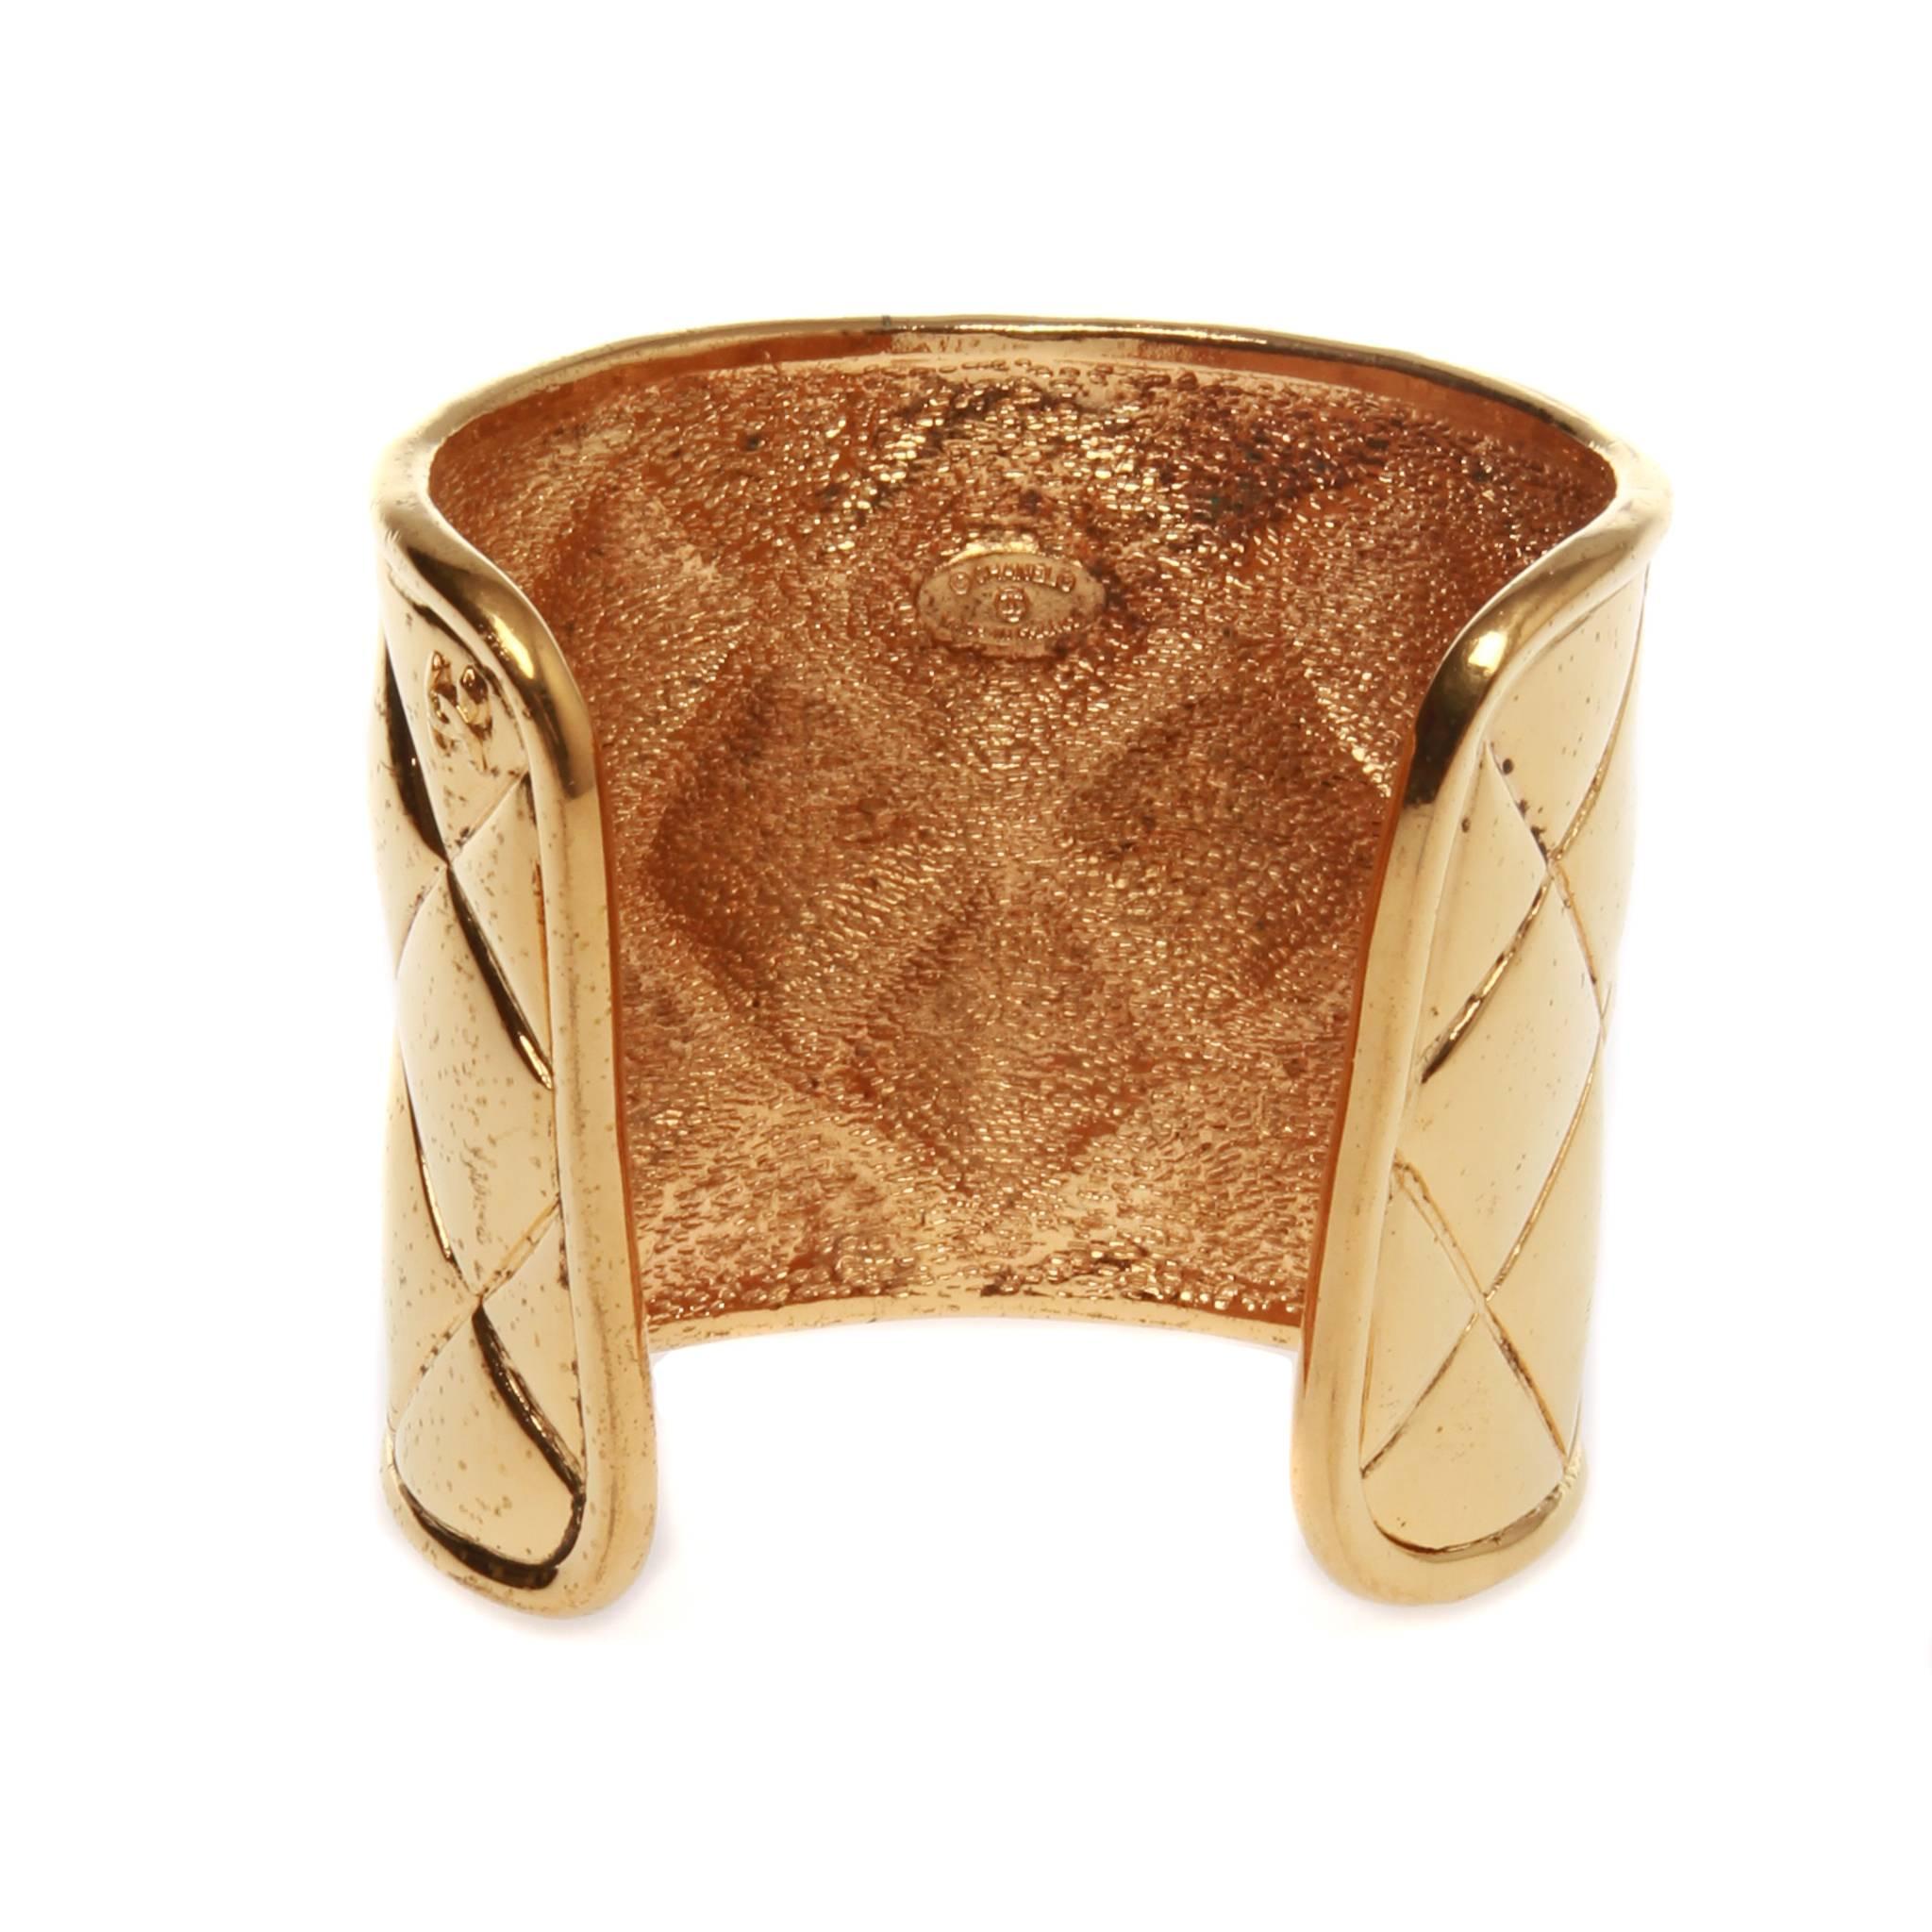 Chanel vintage open cuff featuring a quilt look design in gold-tone metal. Interlocking CC in one corner and brand stamp on inner face.